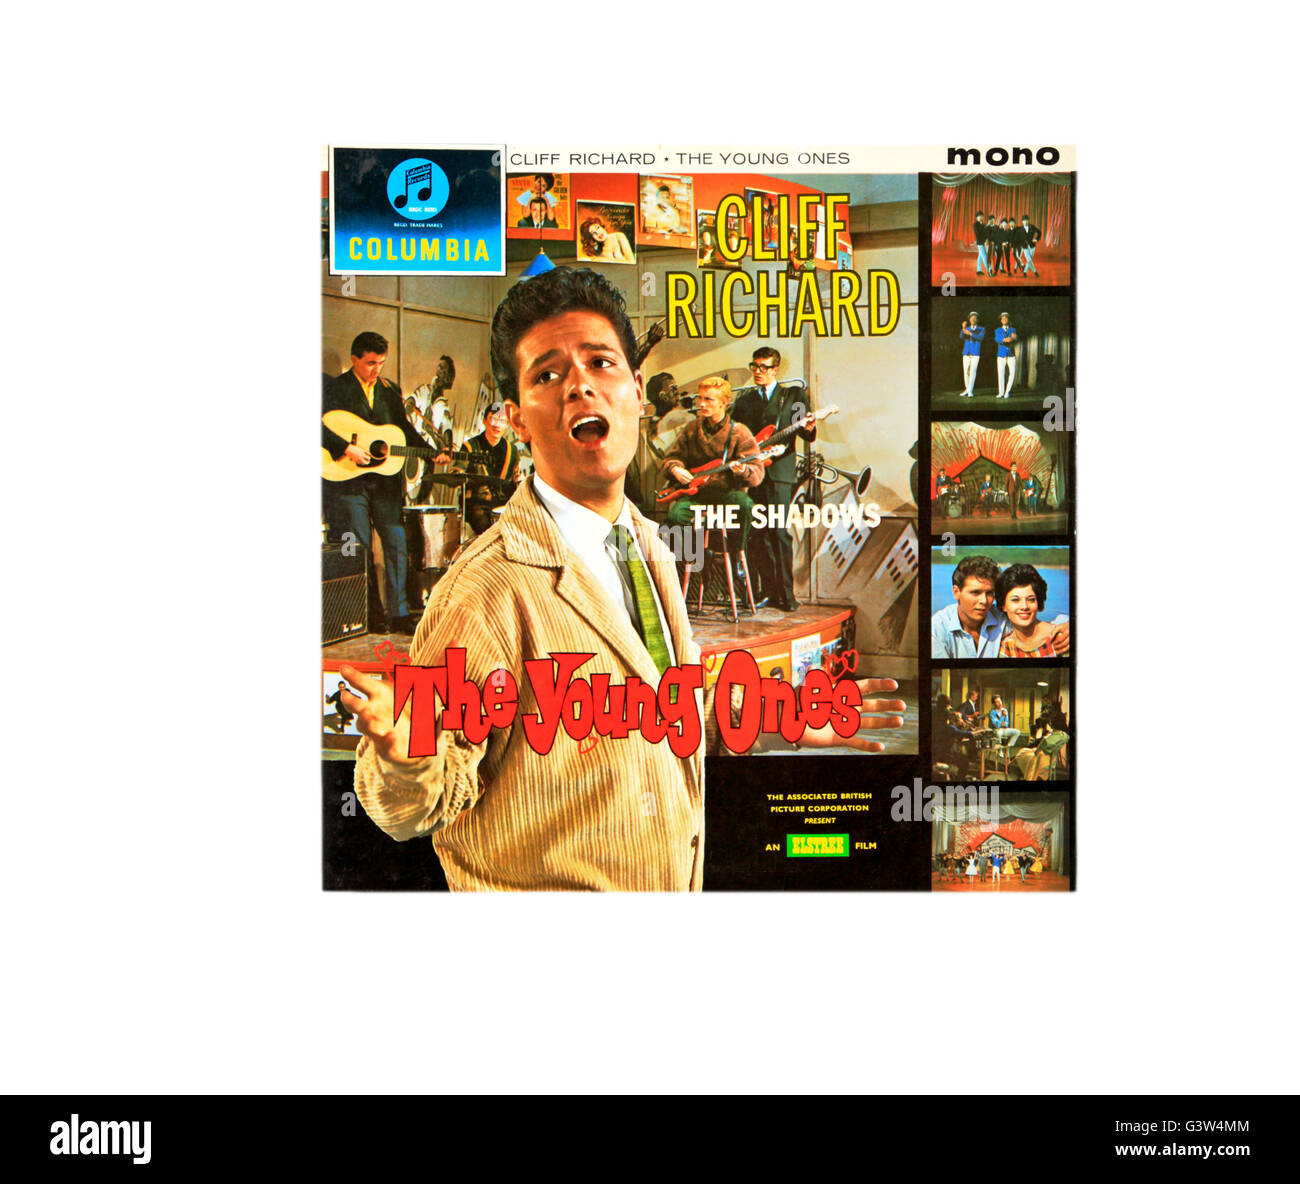 The Young Ones long playing record soundtrack album starring Cliff Richard. Stock Photo